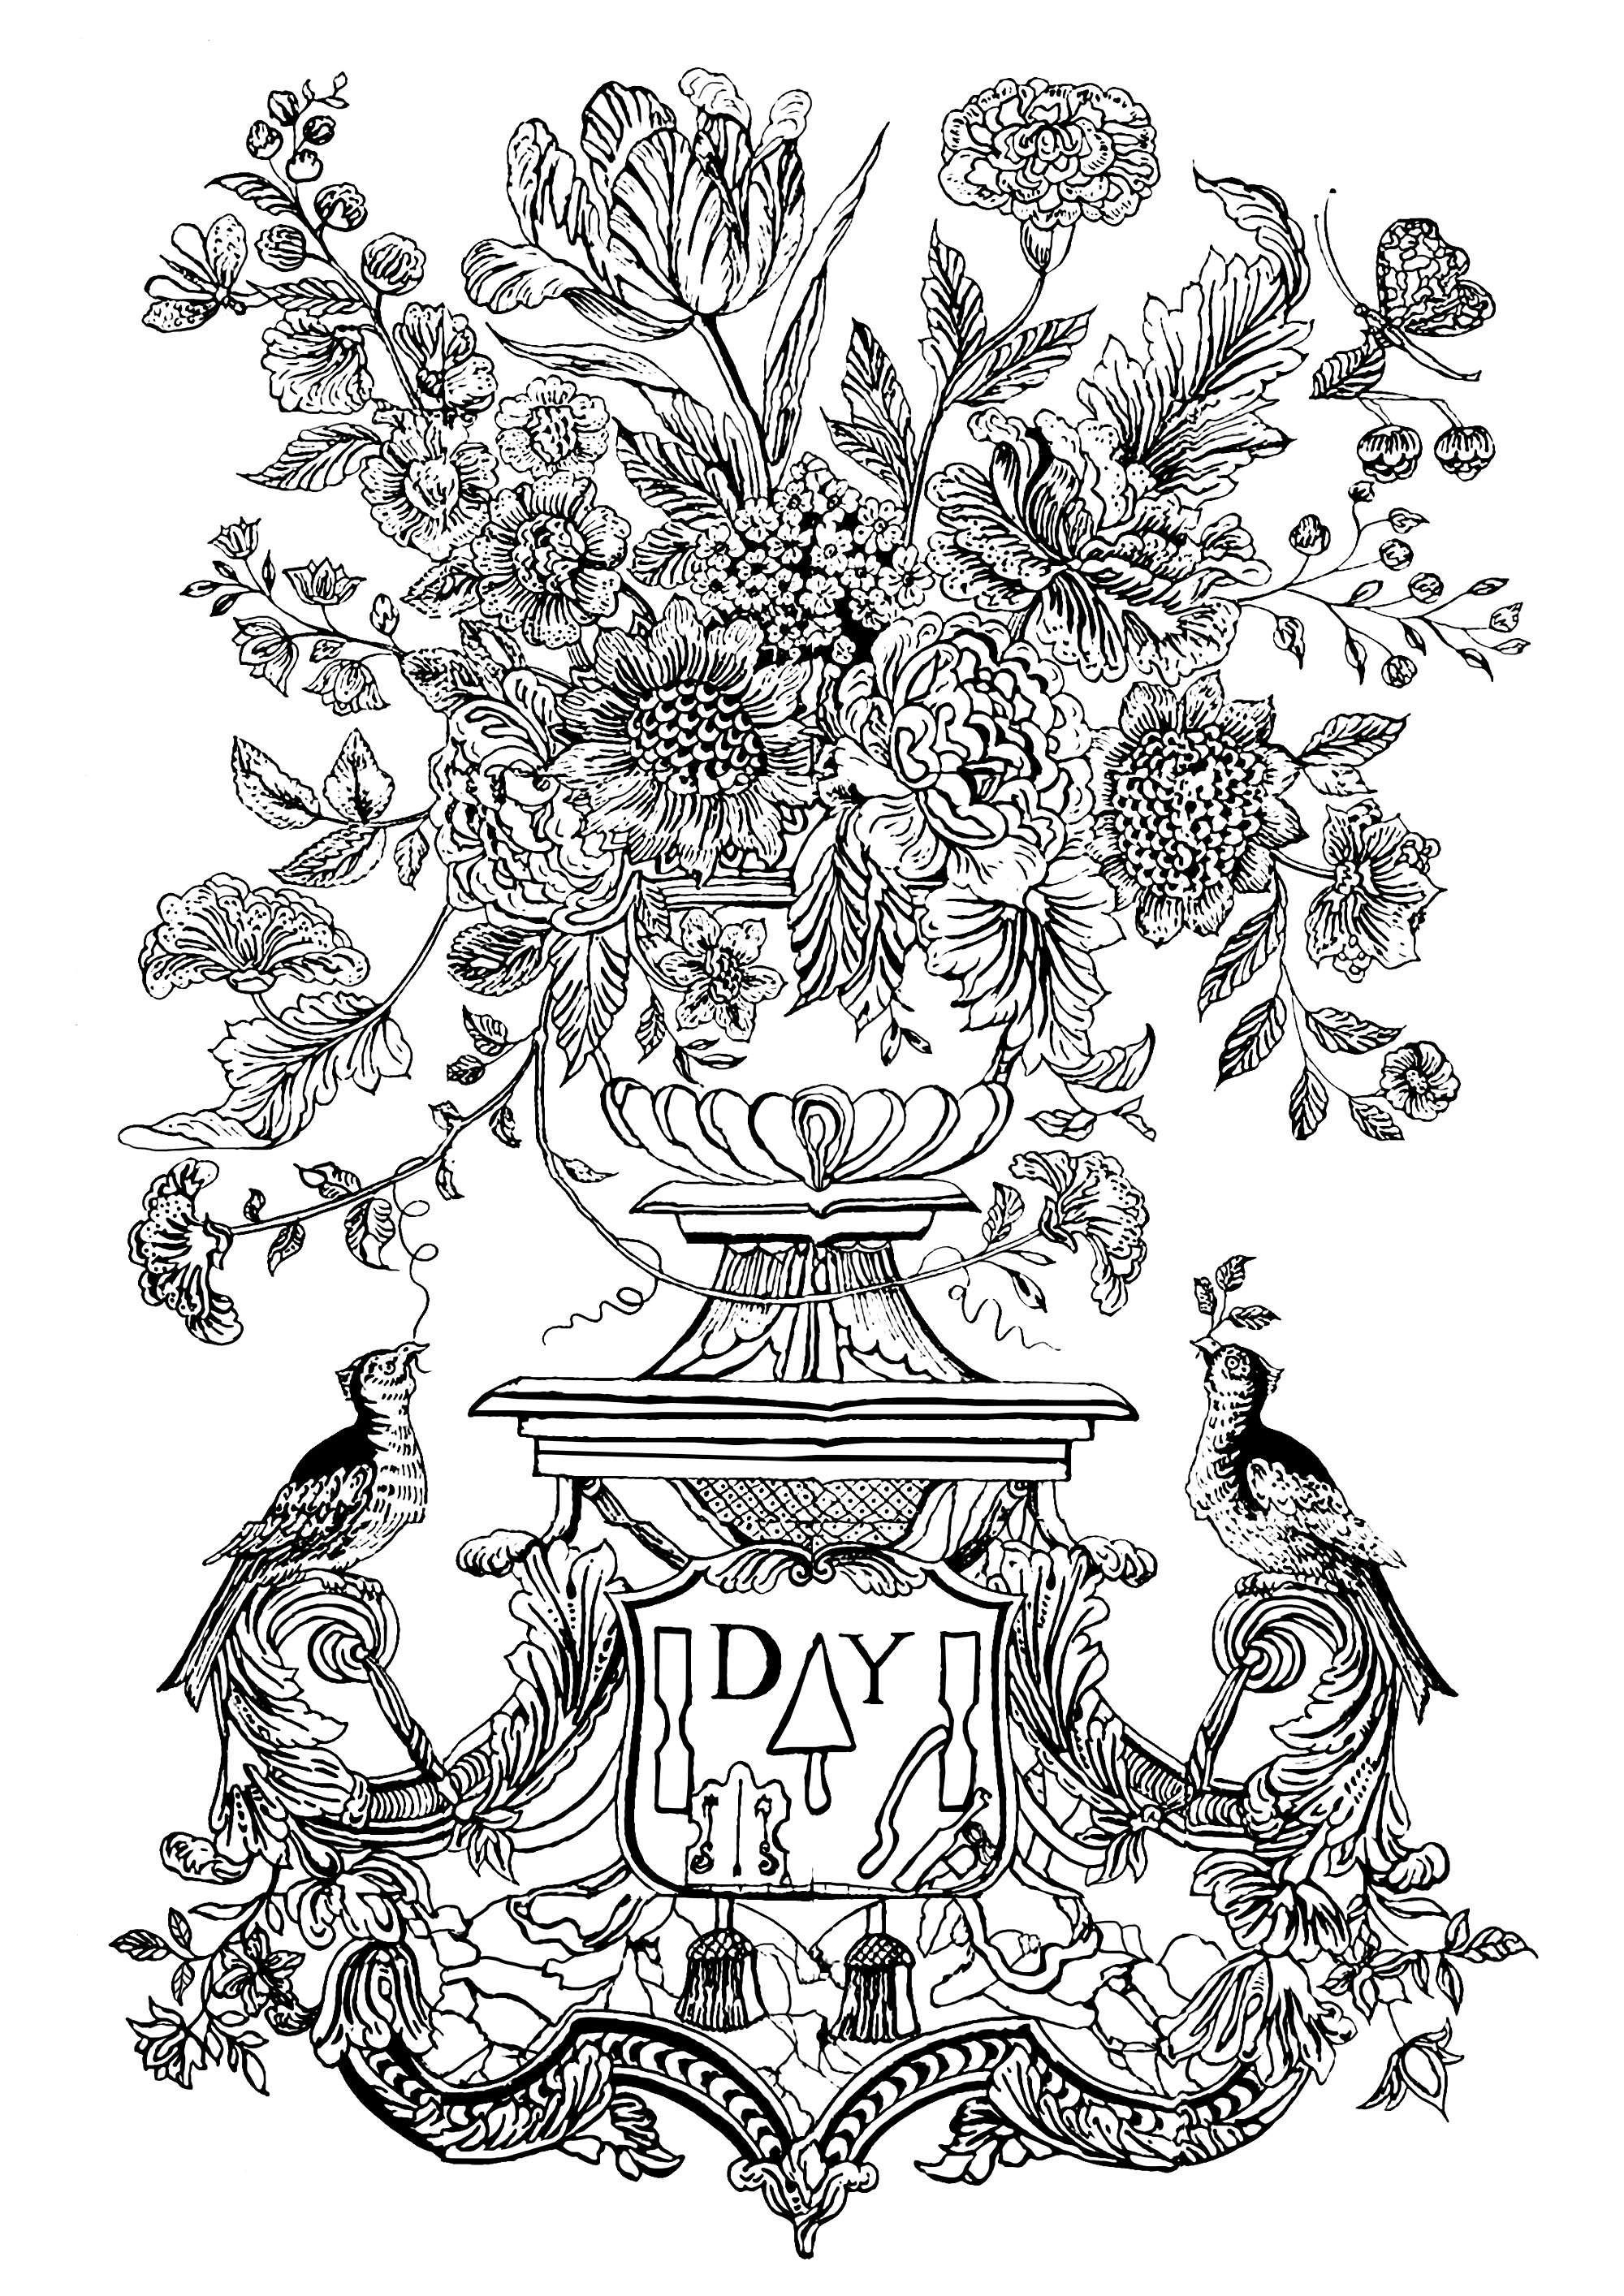 4400 Top Coloring Pages Flower Vase For Free - Hot Coloring Pages